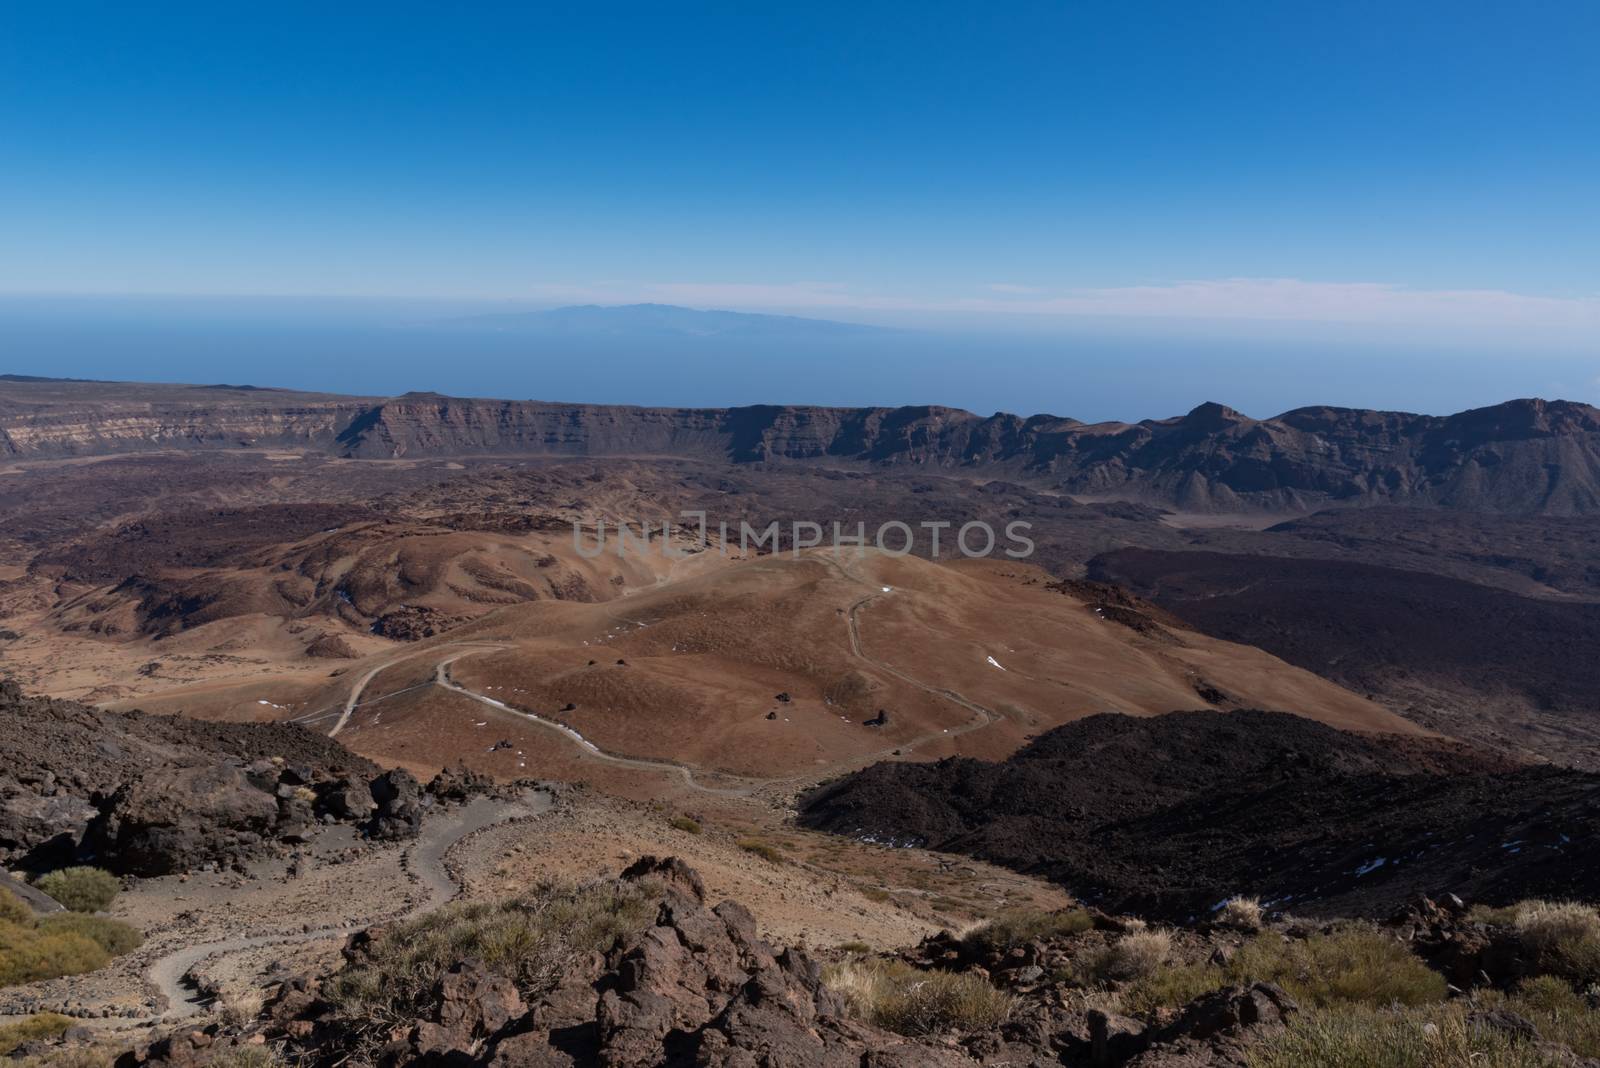 View from Teide то Las Canadas Caldera volcano with solidified lava and Montana Blanca mount. Teide national Park, Tenerife, Canary Islands, Spain. Panorama